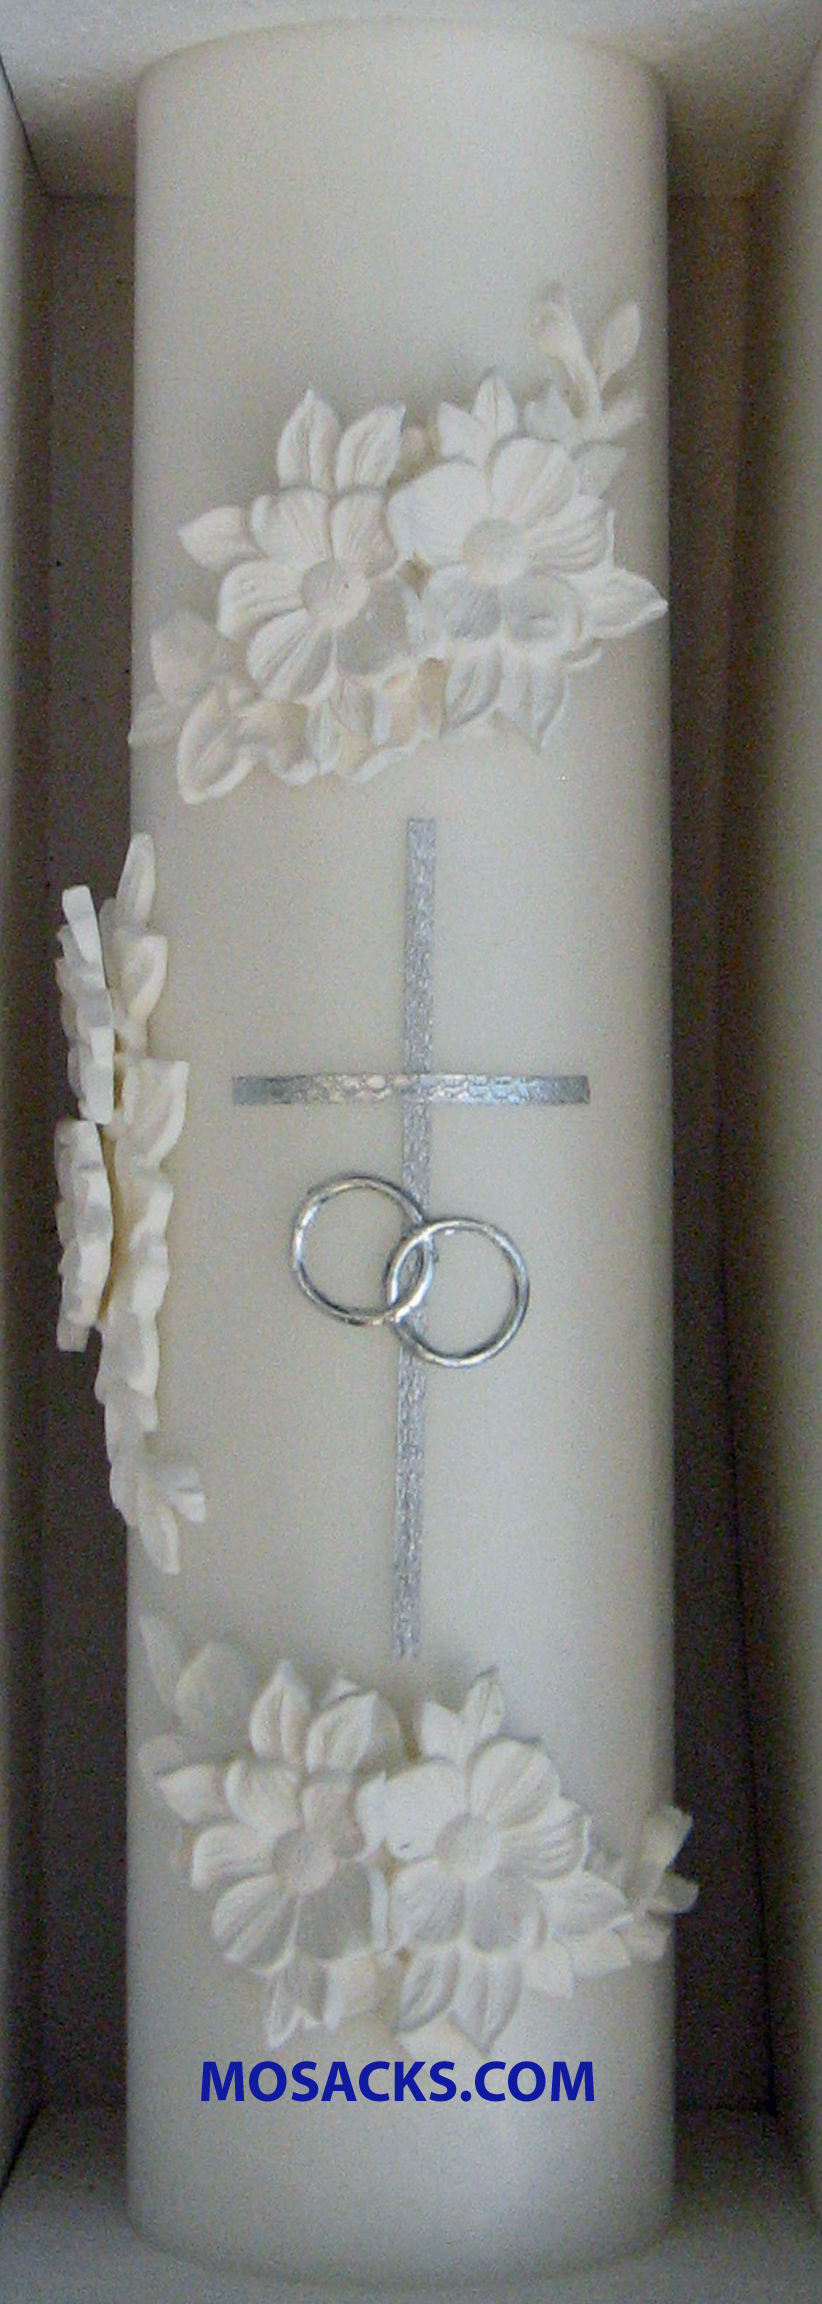 Marriage Holy Matrimony Silver and White Center Unity Candle 84401301